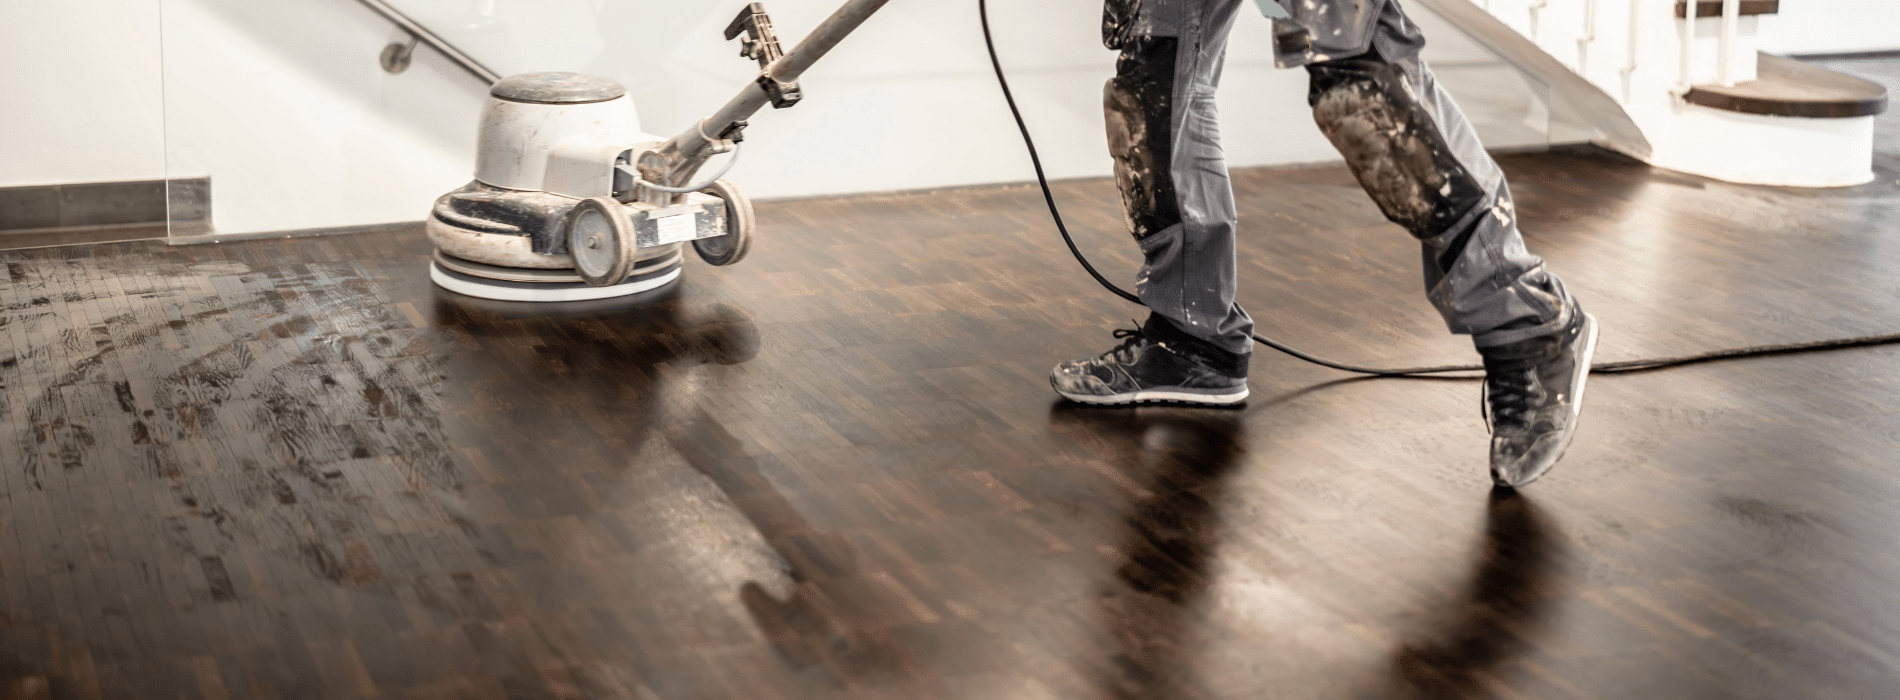 In Forest Gate, E7, Mr Sander® meticulously sand a herringbone floor in progress using a powerful 1450-watt Bona belt sander. Connected to a dust extraction system with a HEPA filter, their process ensures a clean and efficient result. 